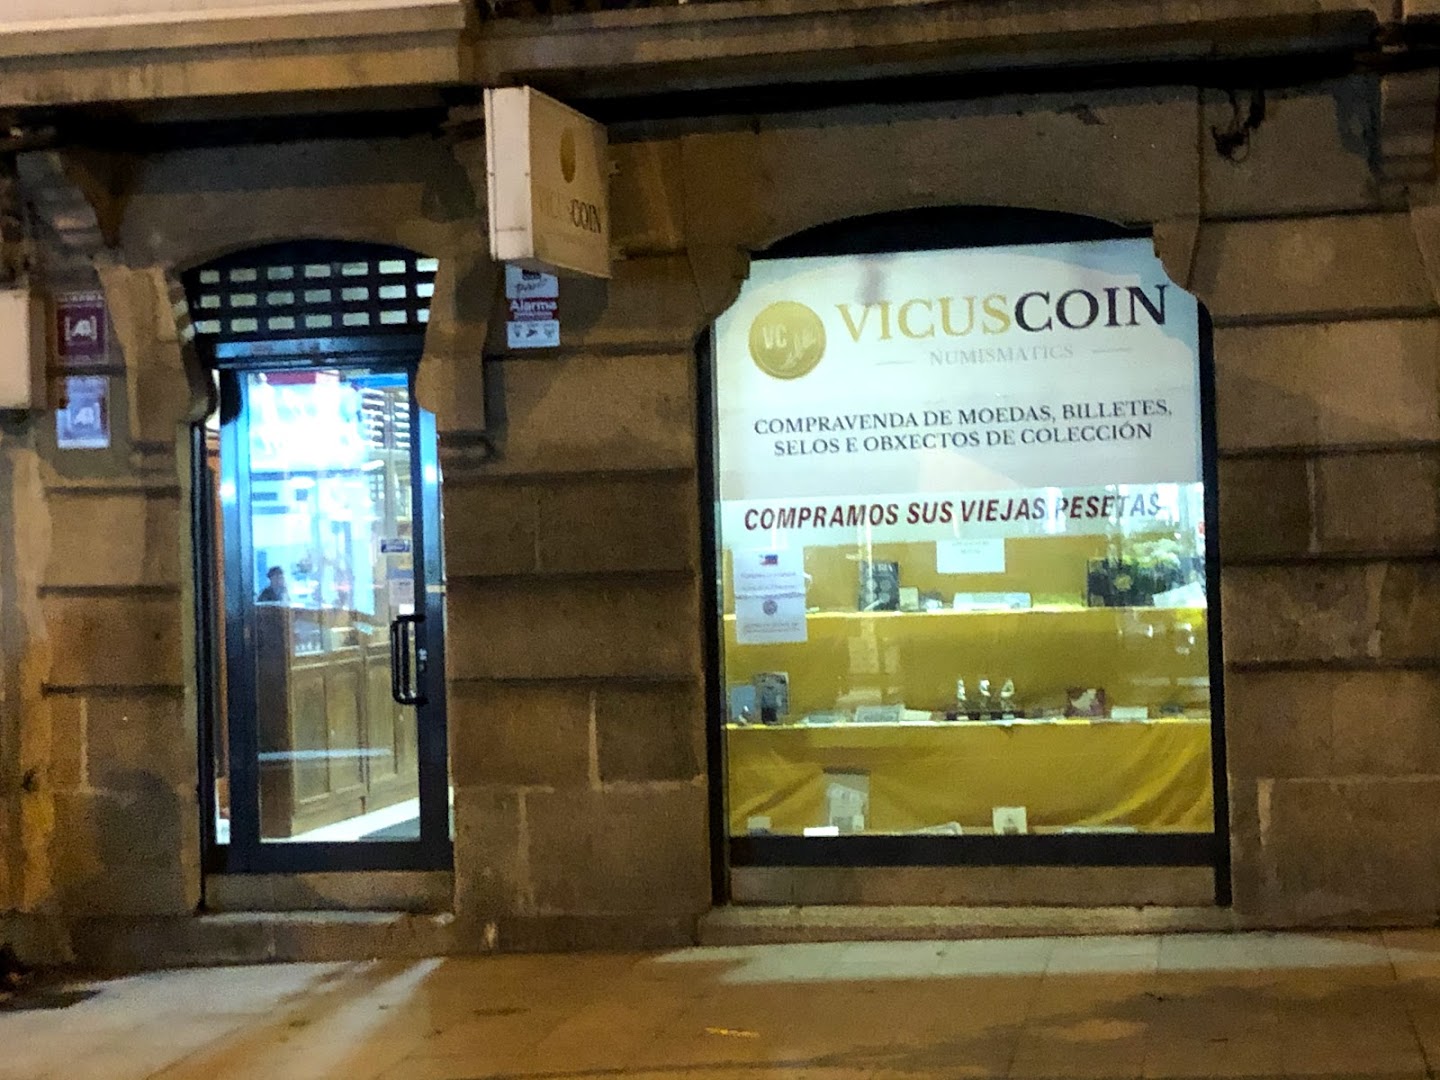 Vicus Coin